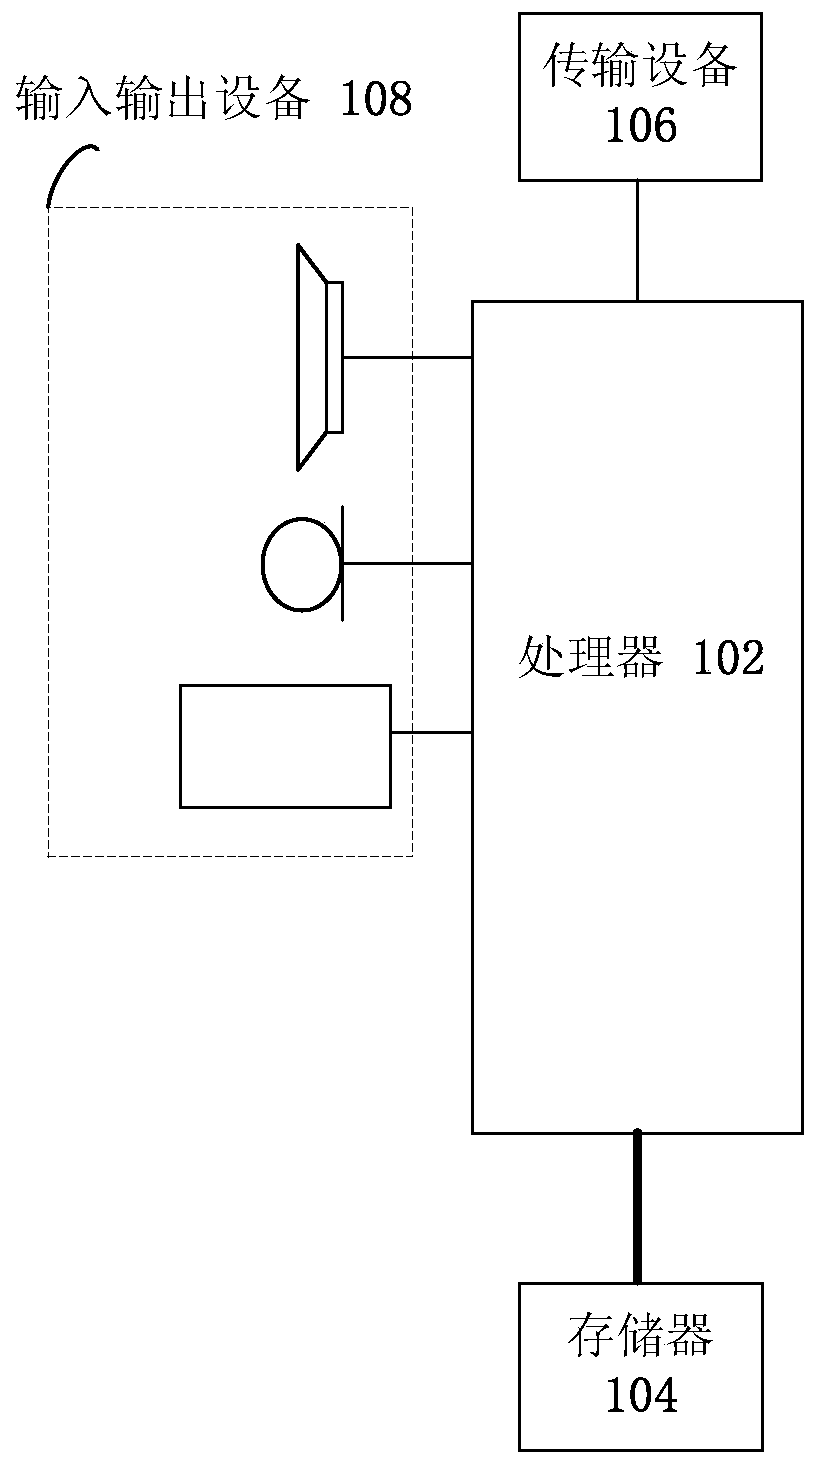 Restaurant kitchen monitoring method and device